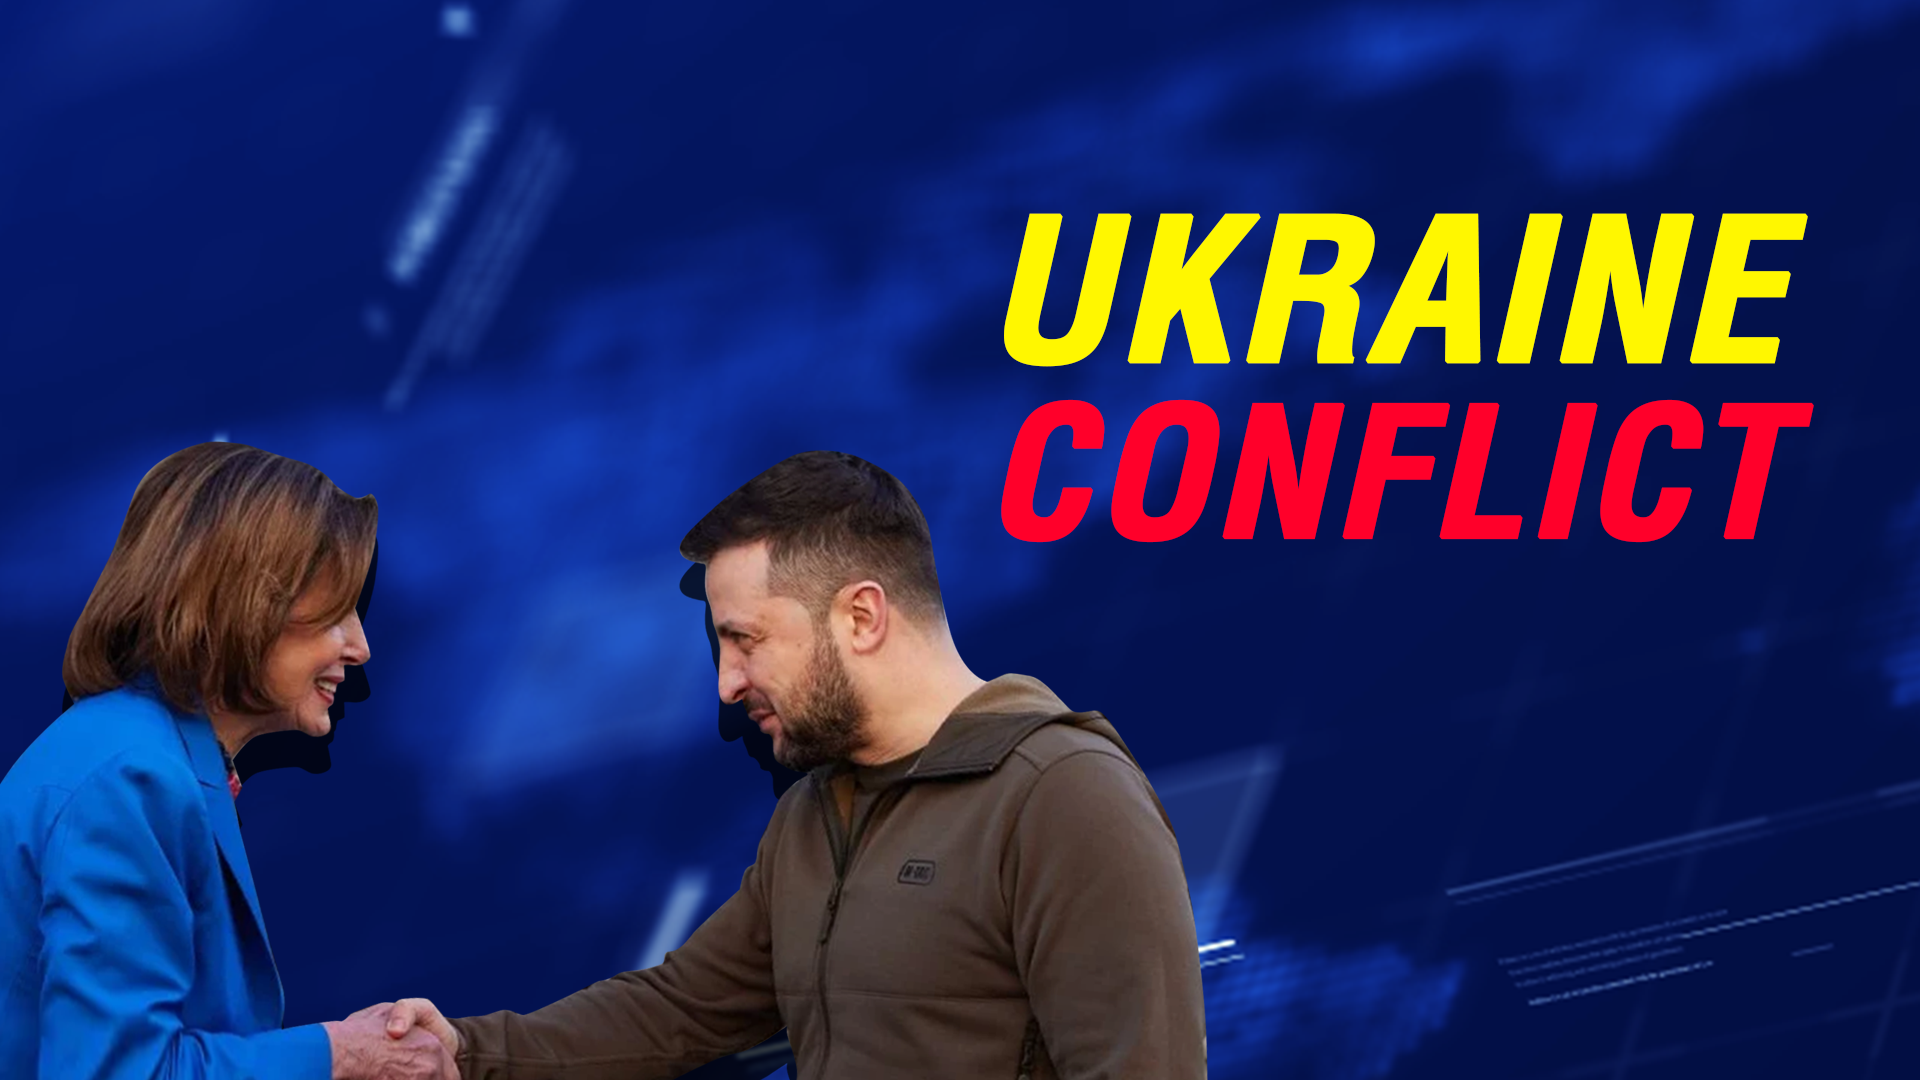 More arms for Ukraine: is this a world conflict now?